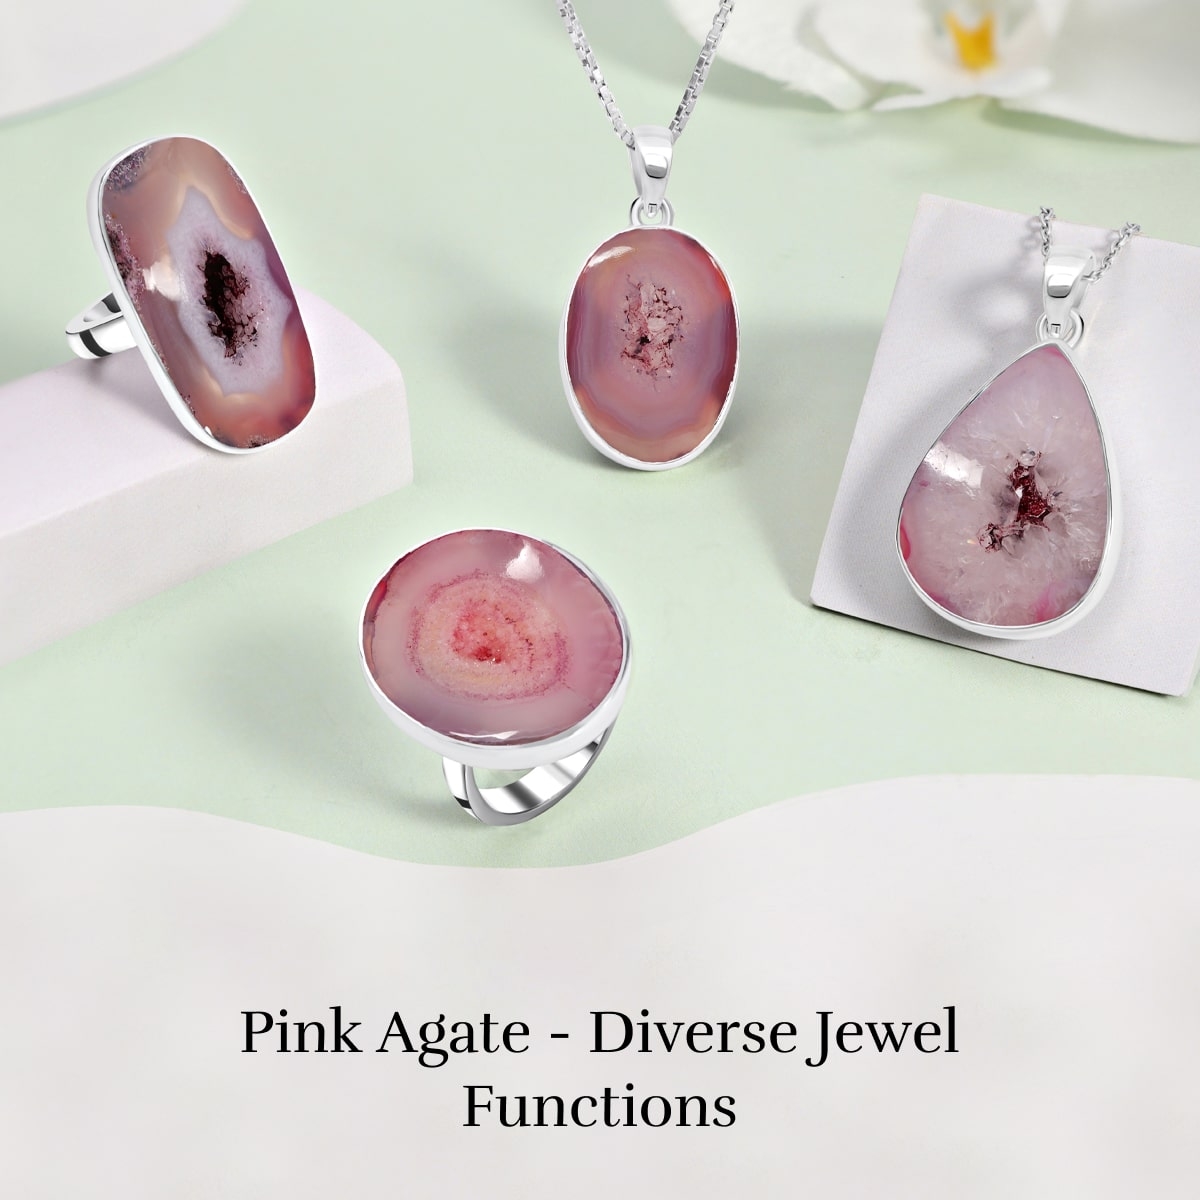 Uses of Pink Agate Jewel